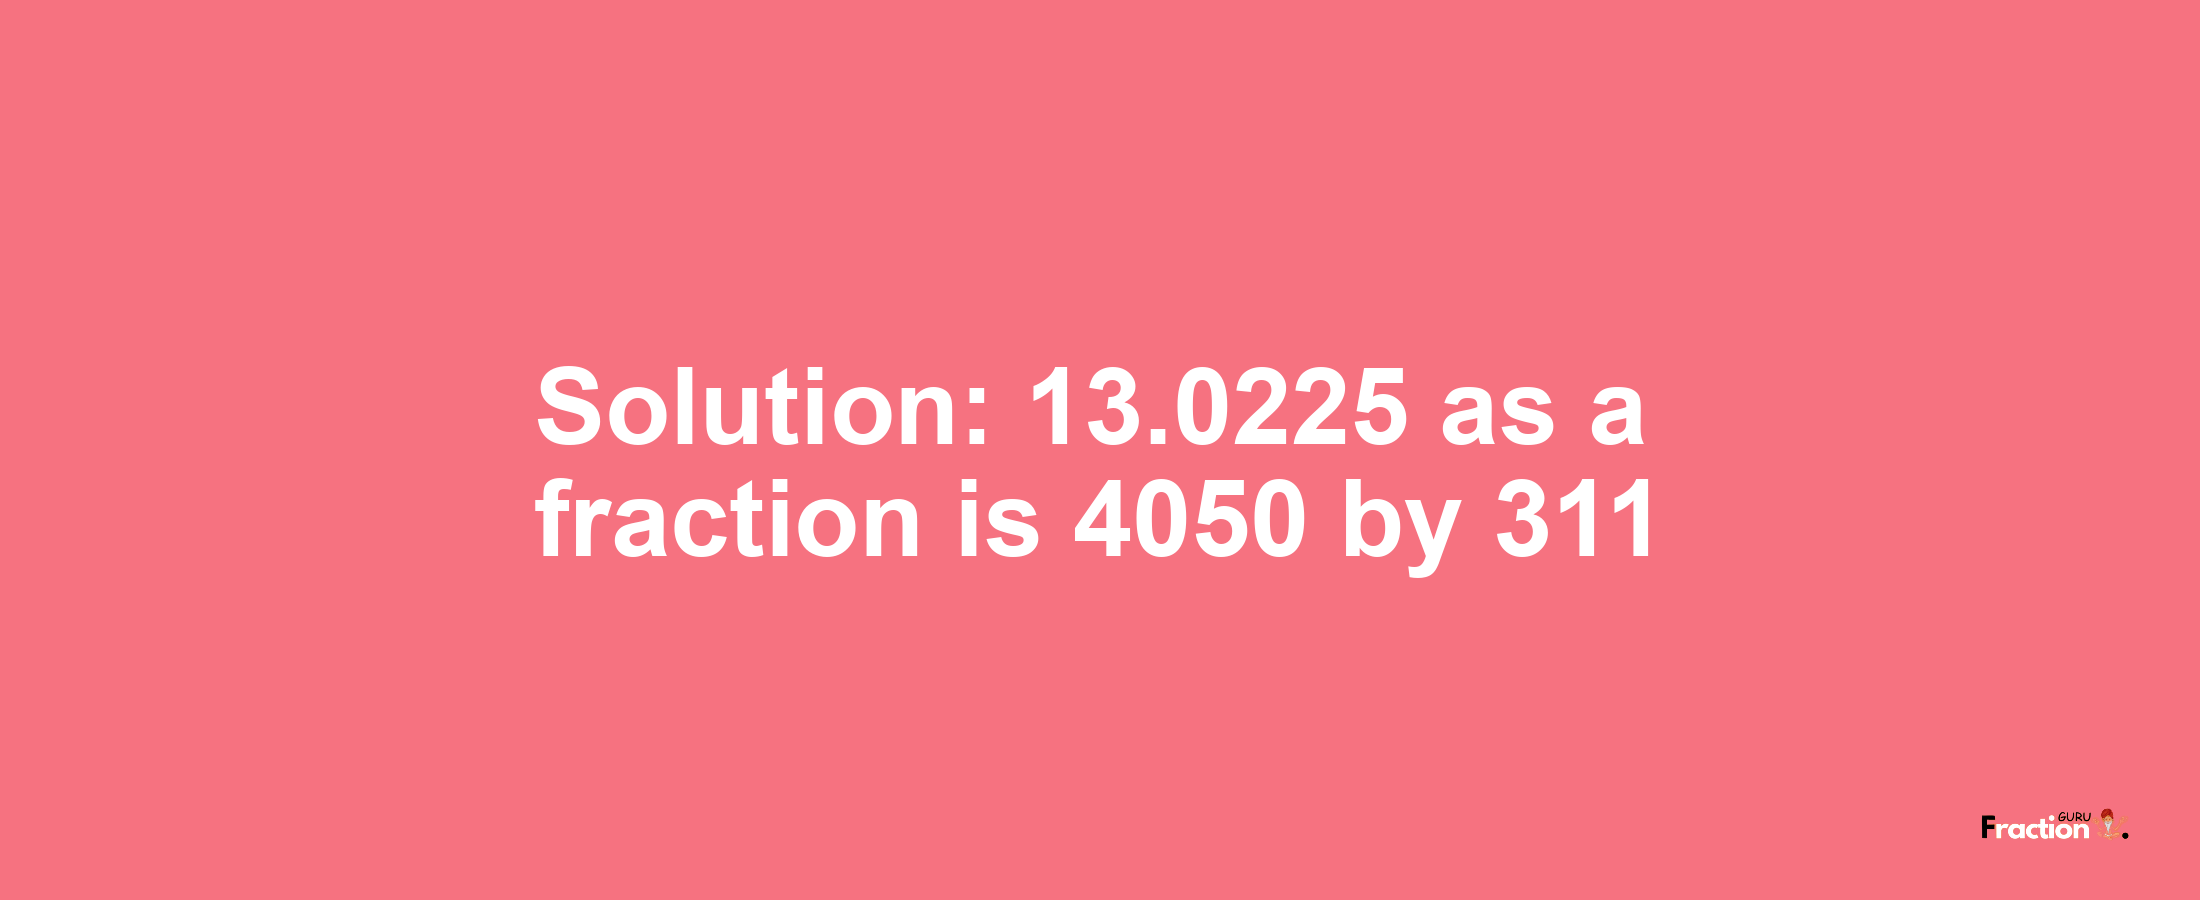 Solution:13.0225 as a fraction is 4050/311